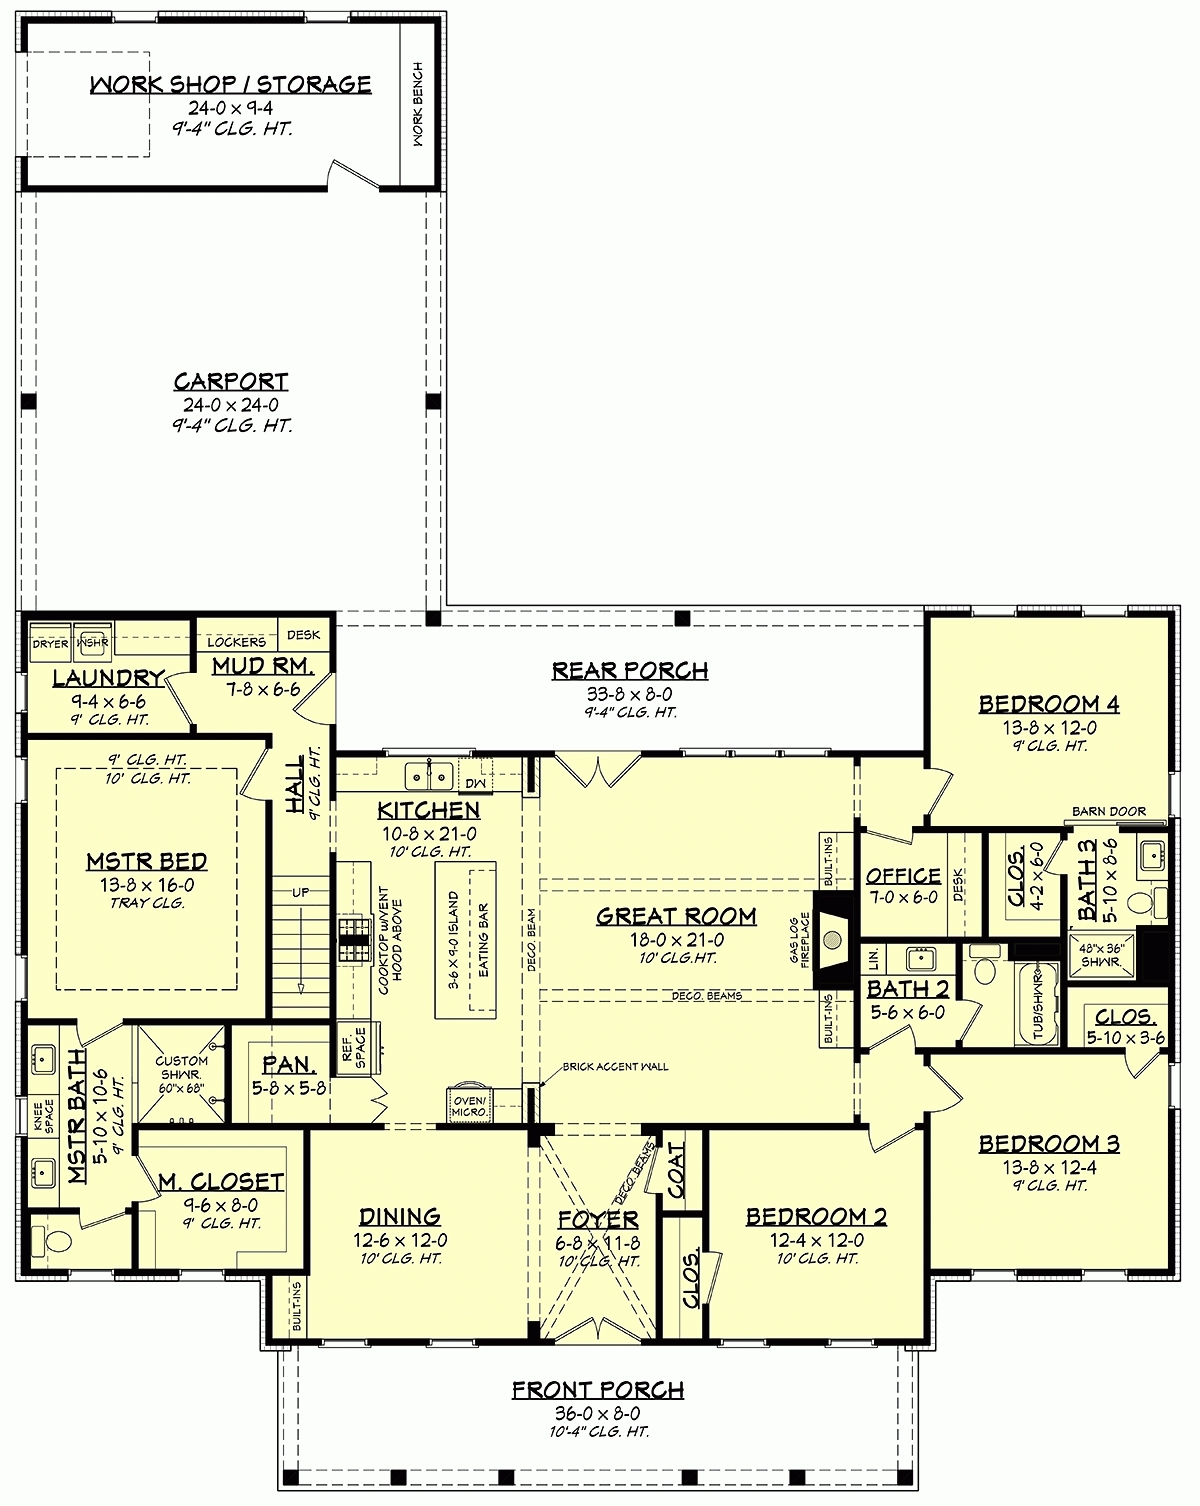 Splendid 4 bedroom house plans | family home plans within simple 4 bedroom home plans